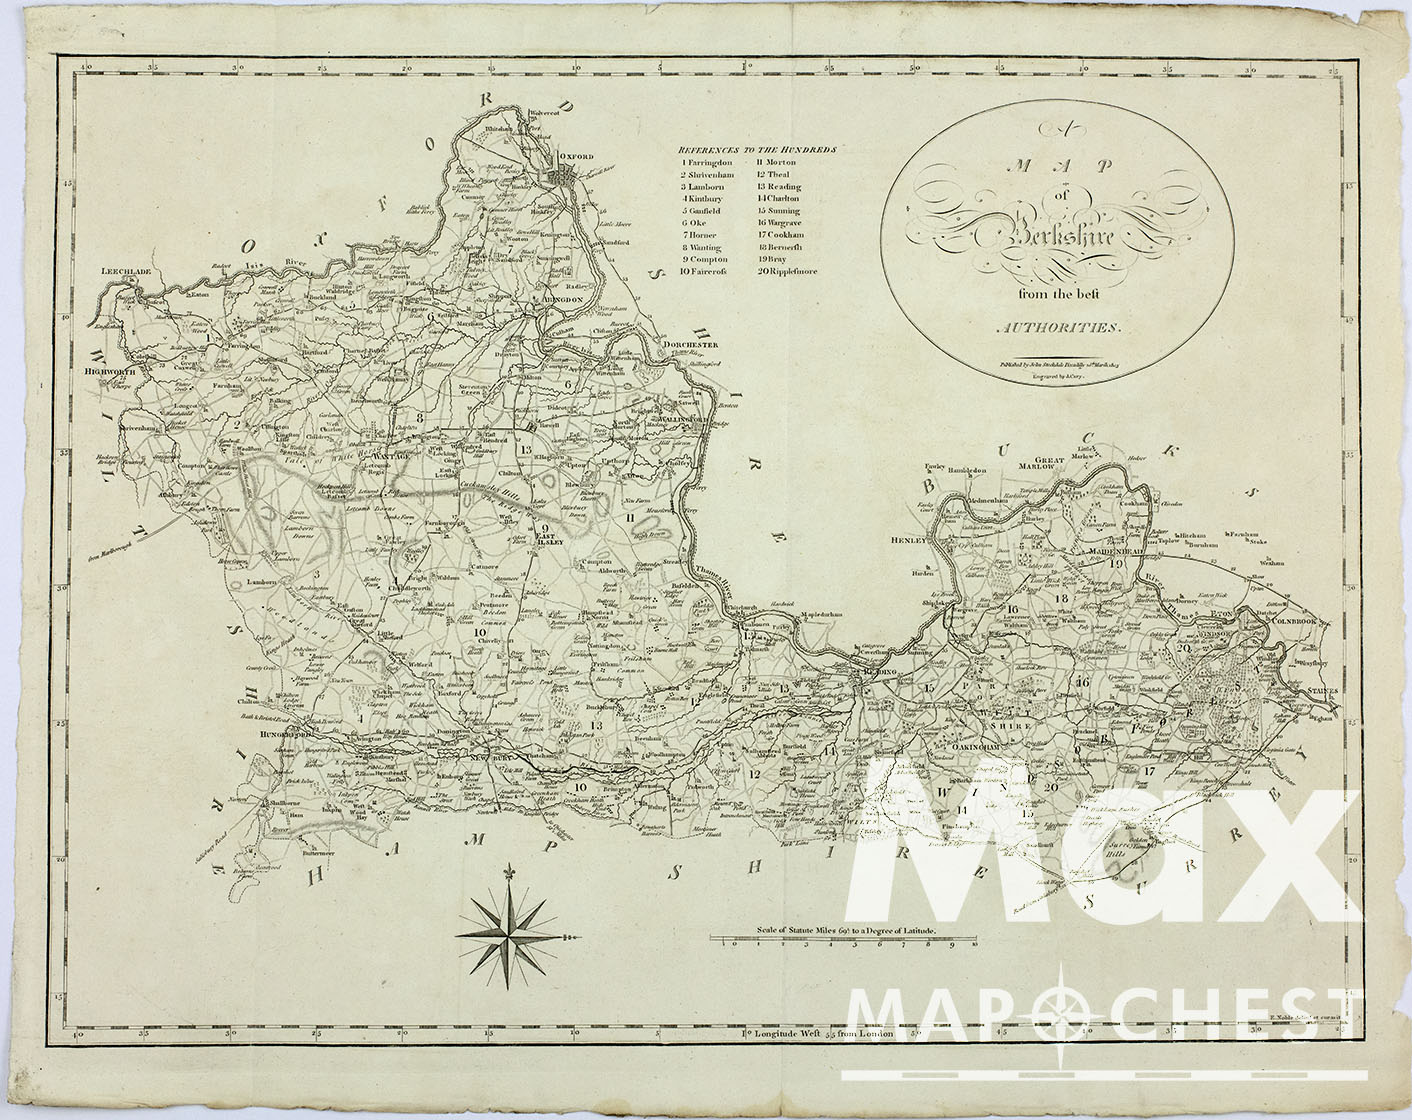 Mapchest | Buy Authentic Old Maps Online